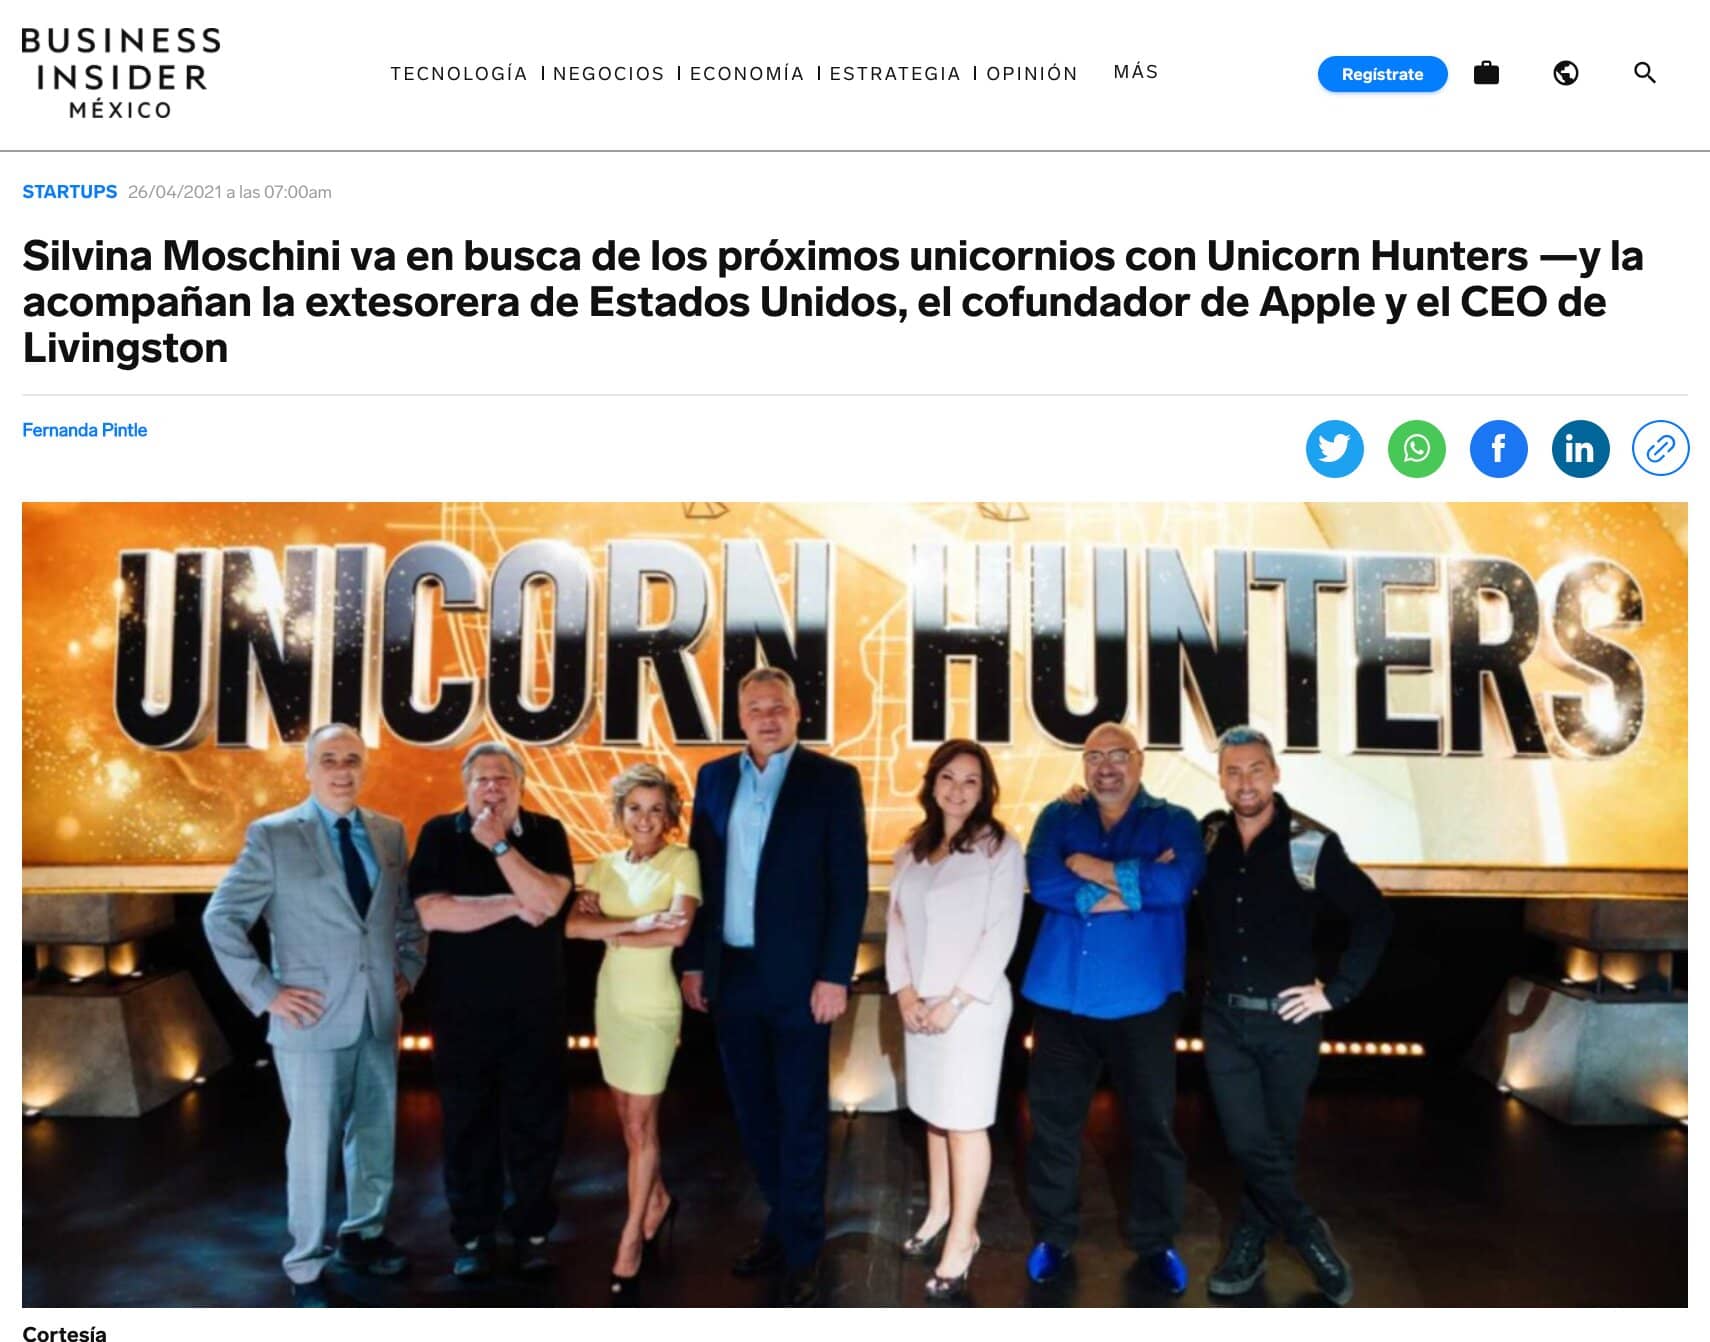 Business Insider - Mexico